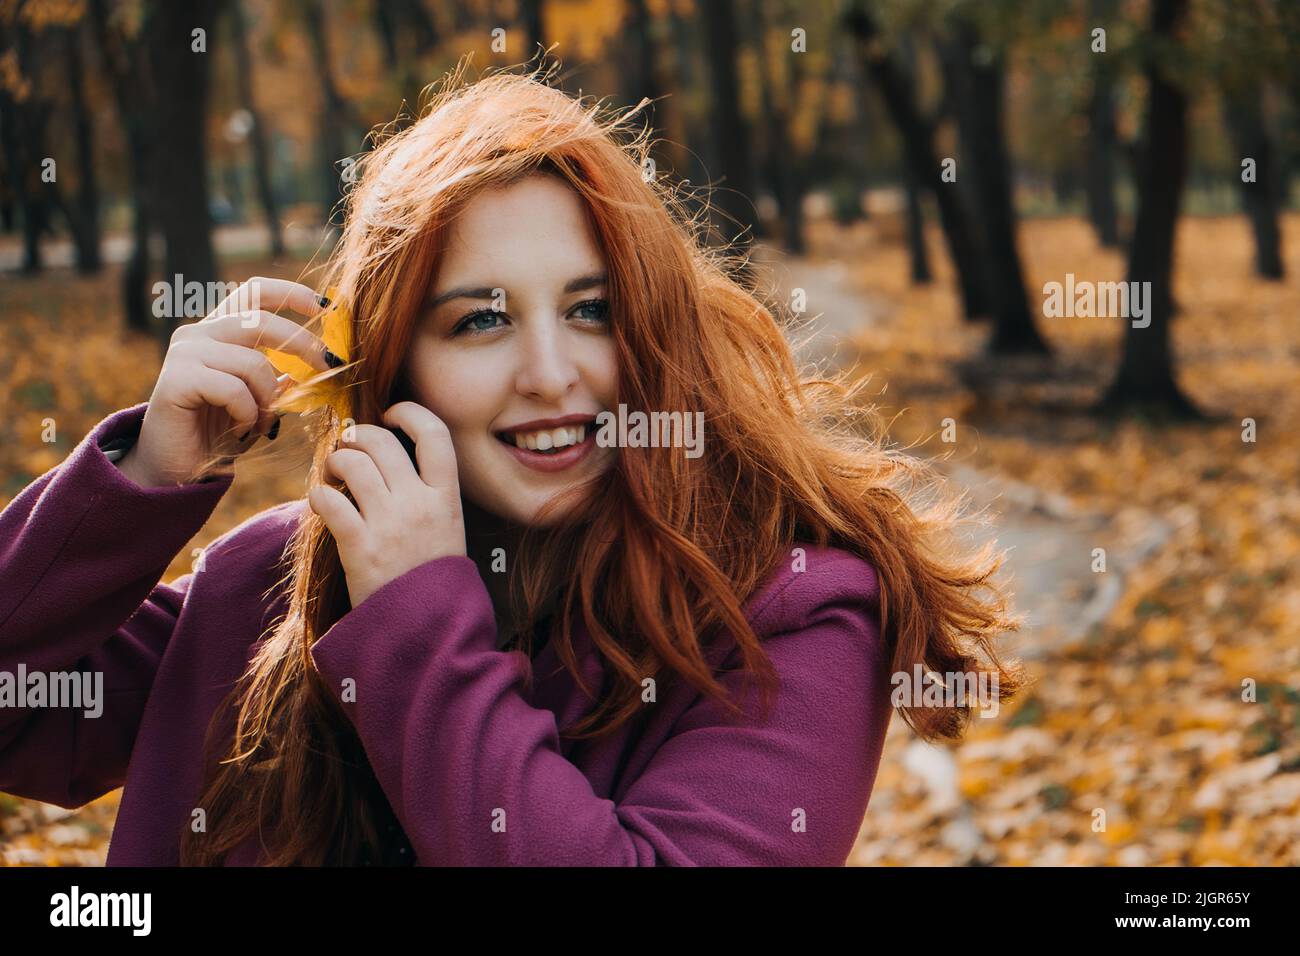 Autumn portrait of candid beautiful red-haired girl with fall leaves in hair. Stock Photo